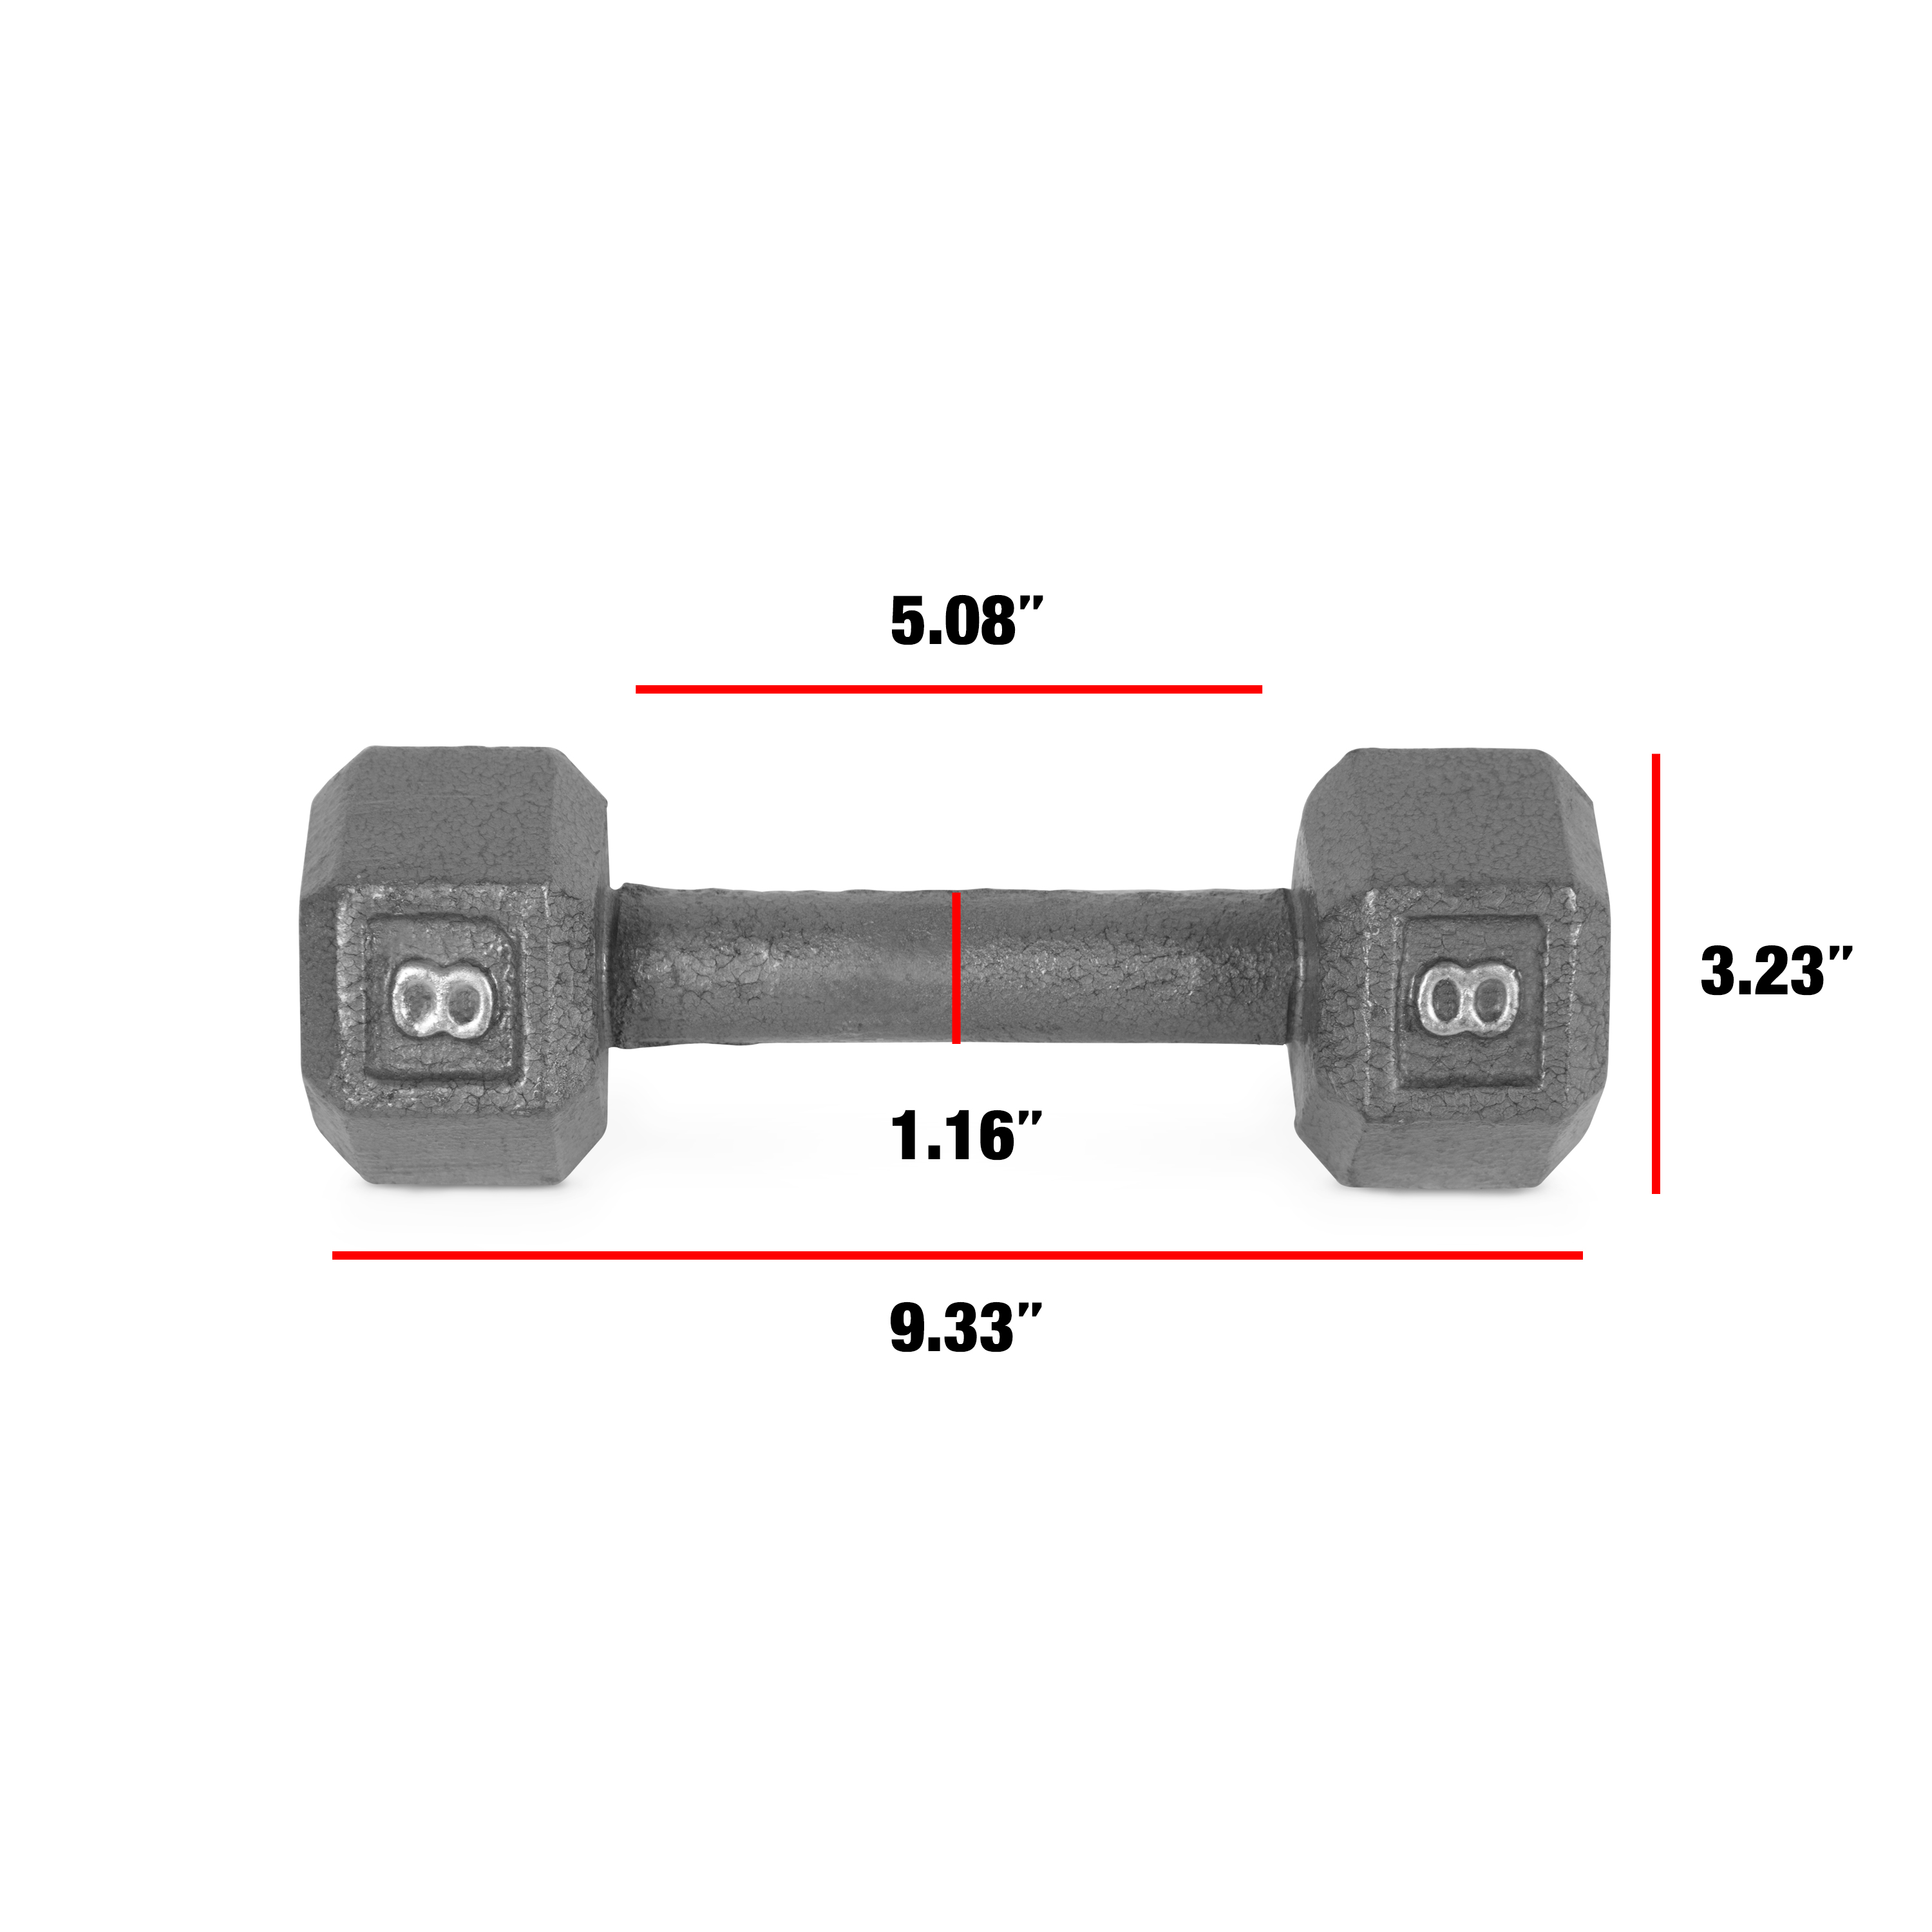 CAP Barbell 8lb Cast Iron Hex Dumbbell, Single - image 2 of 6